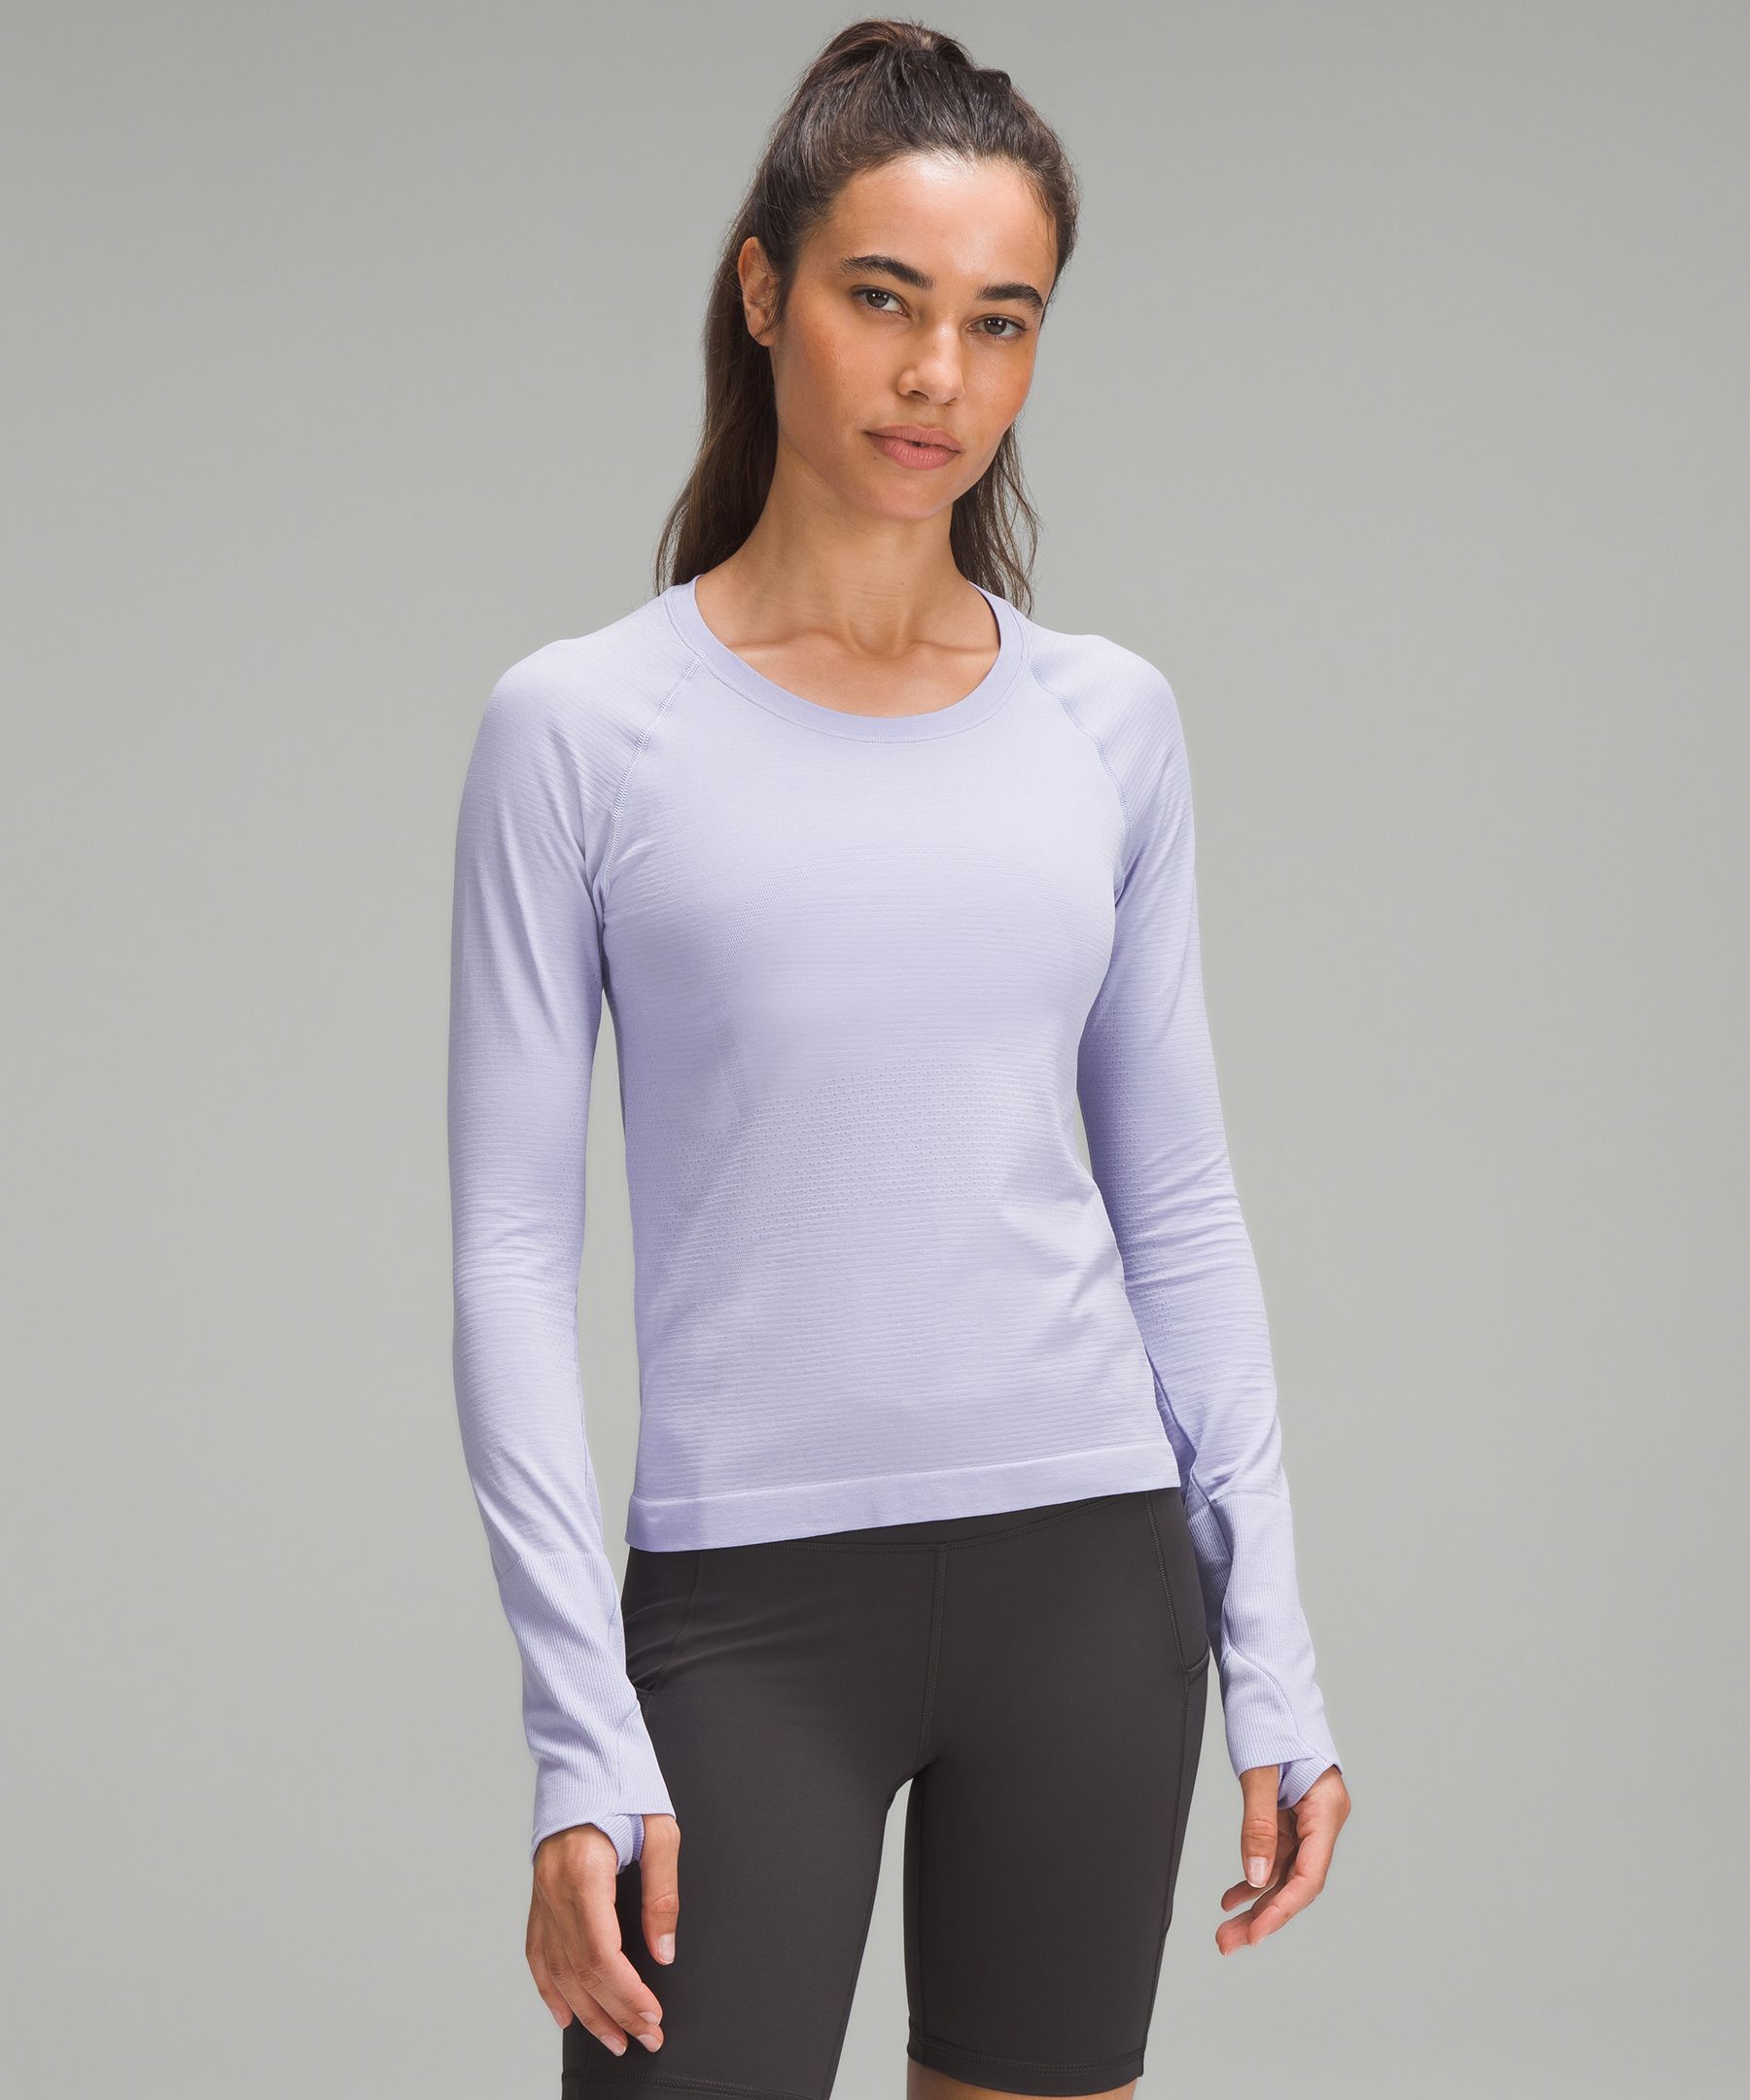 Shop lululemon Blended Fabrics Street Style Activewear Accessories by  Mia_maple